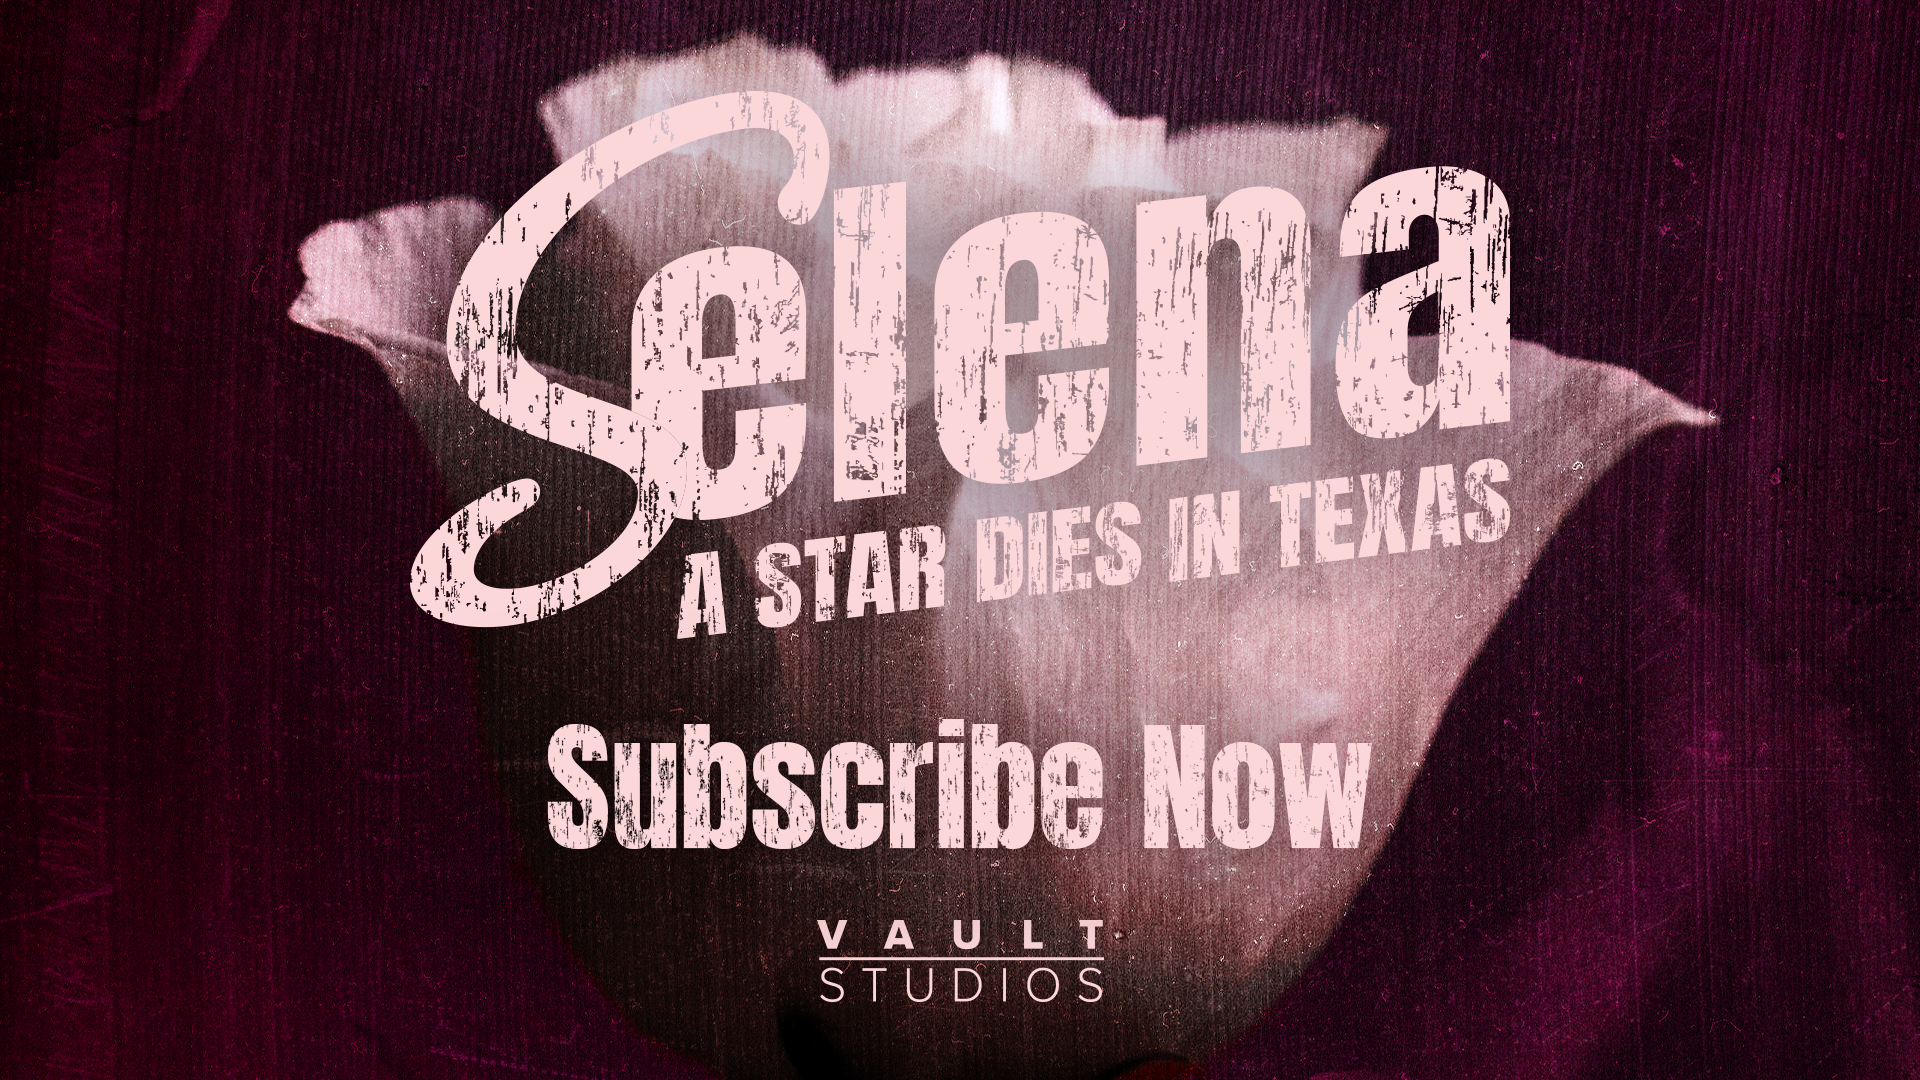 Take a deep dive into the murder of Tejano music legend Selena Quintanilla-Perez with "Selena: A Star Dies in Texas" from Vault Studios and KENS 5.